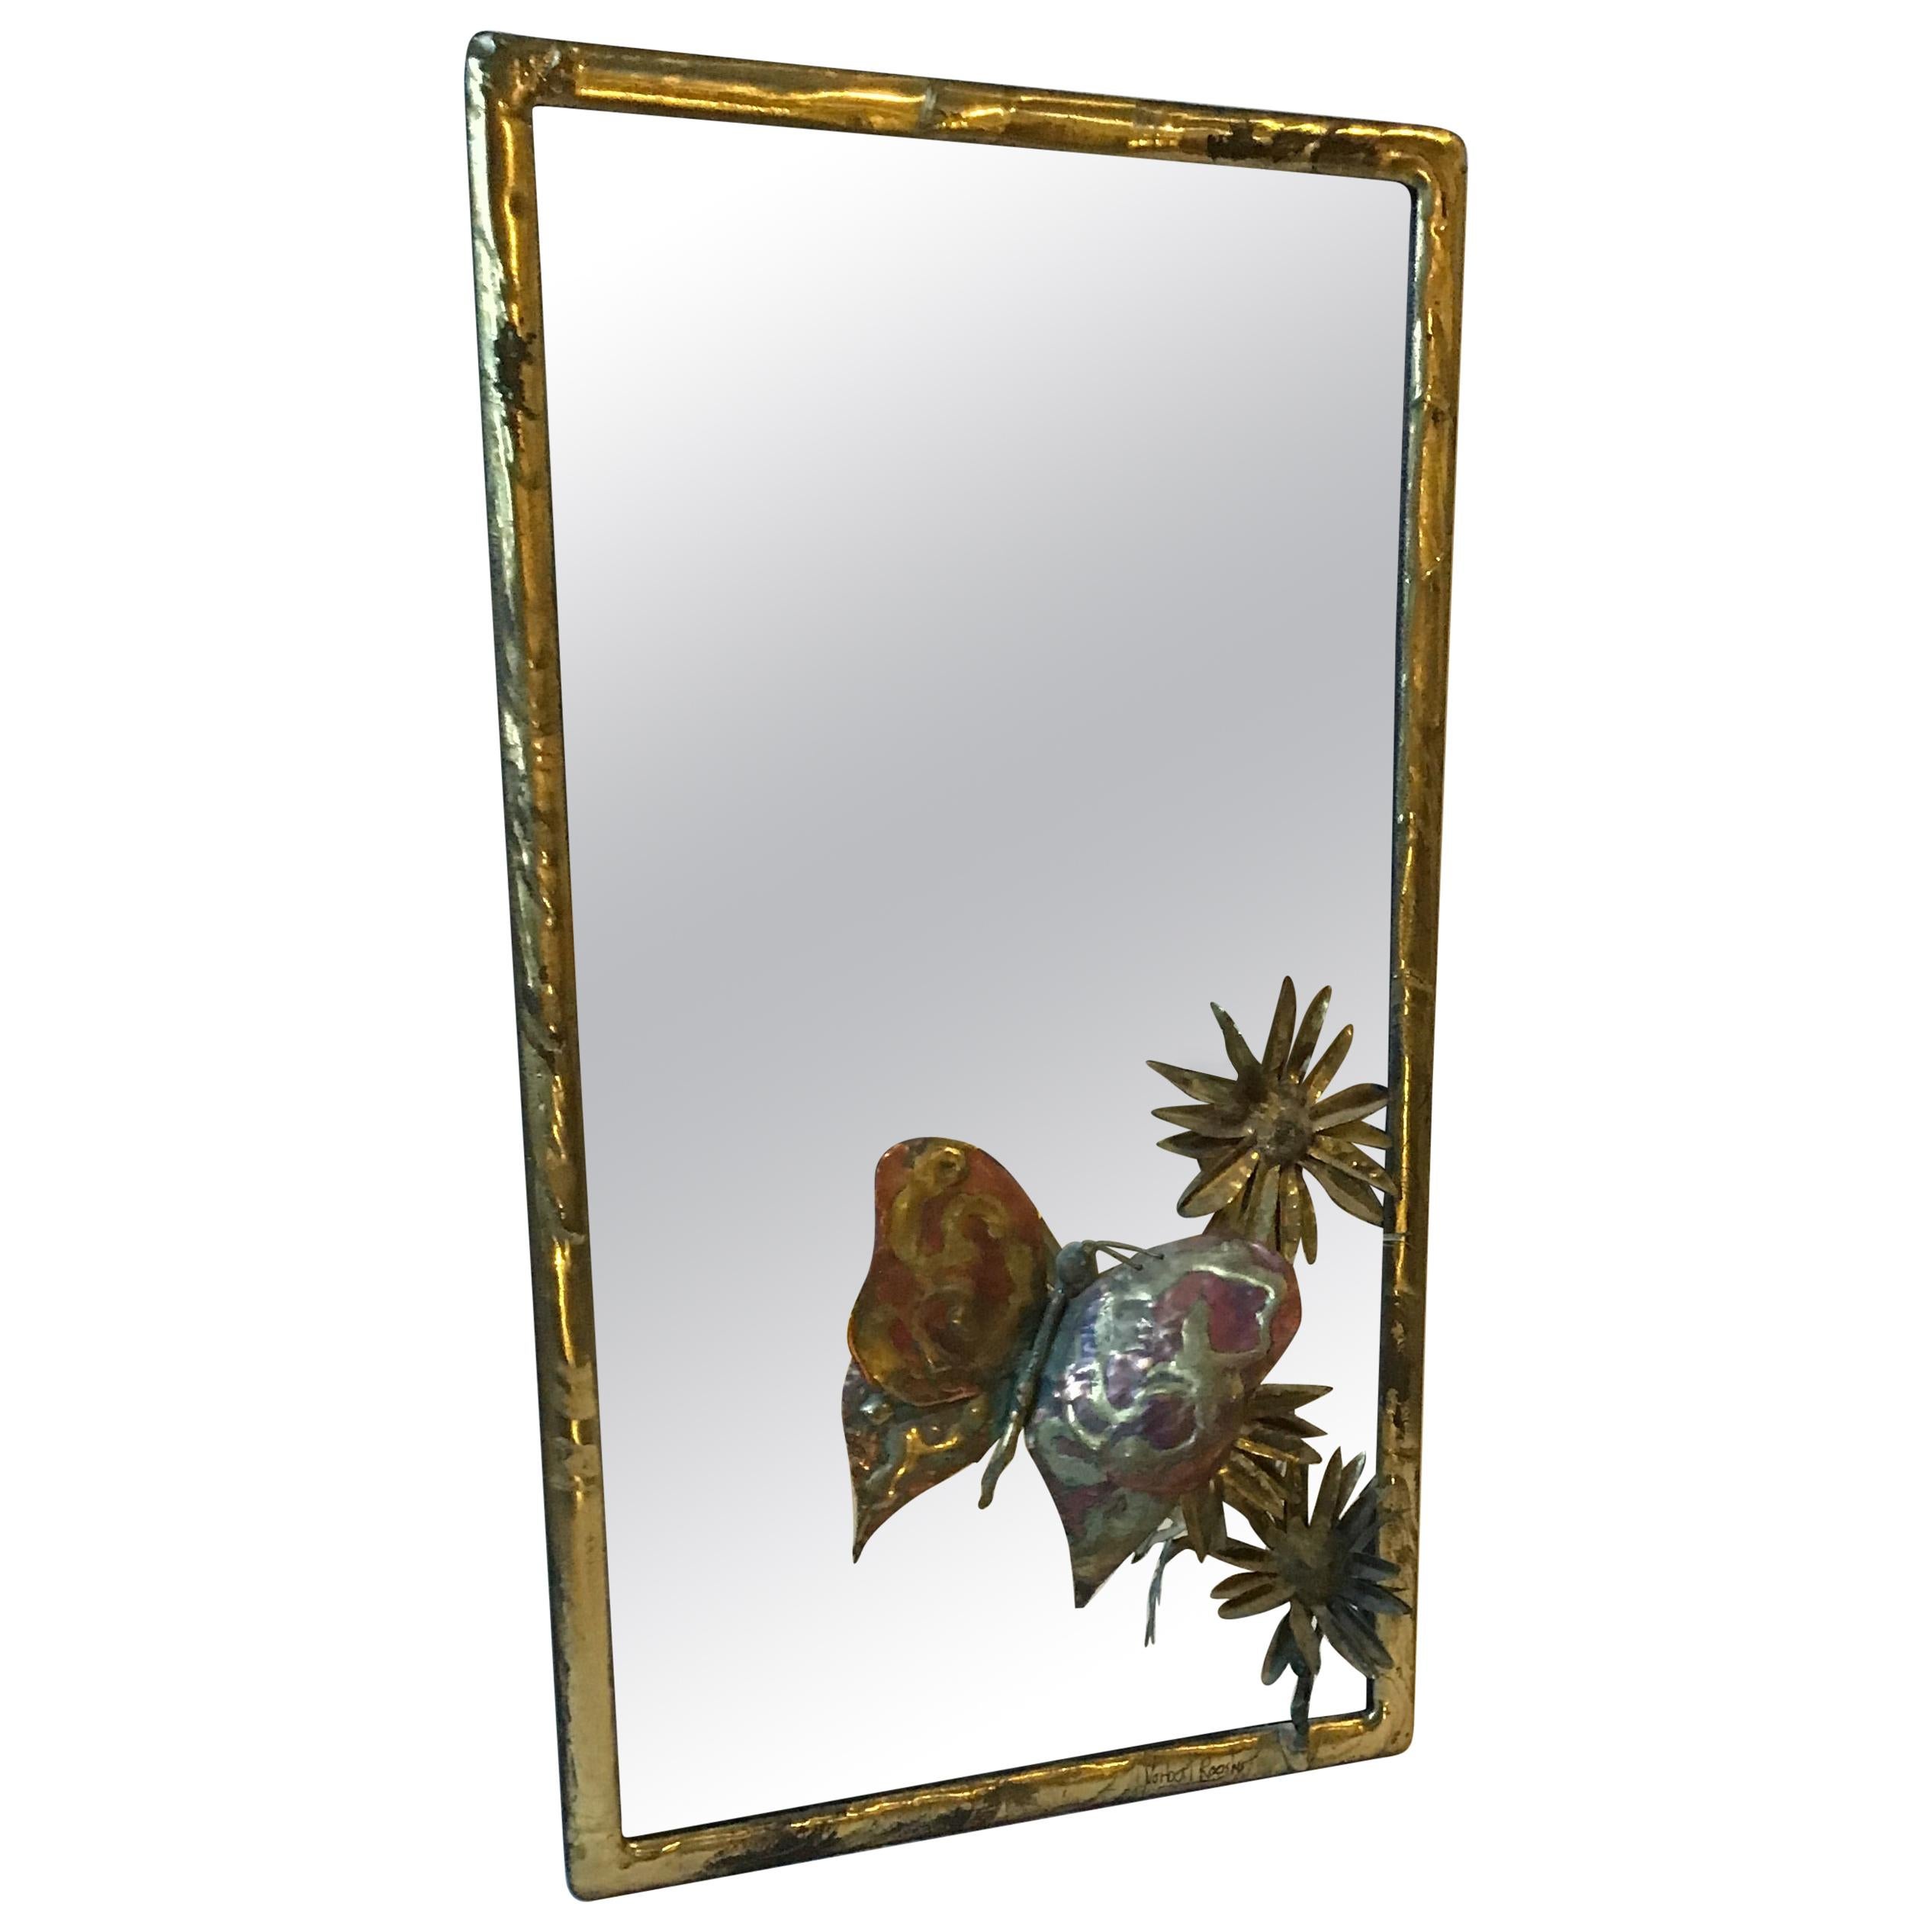 1970s  Nober Roosnr Brass Plated Small Mirror with Butterfly and Flower  For Sale